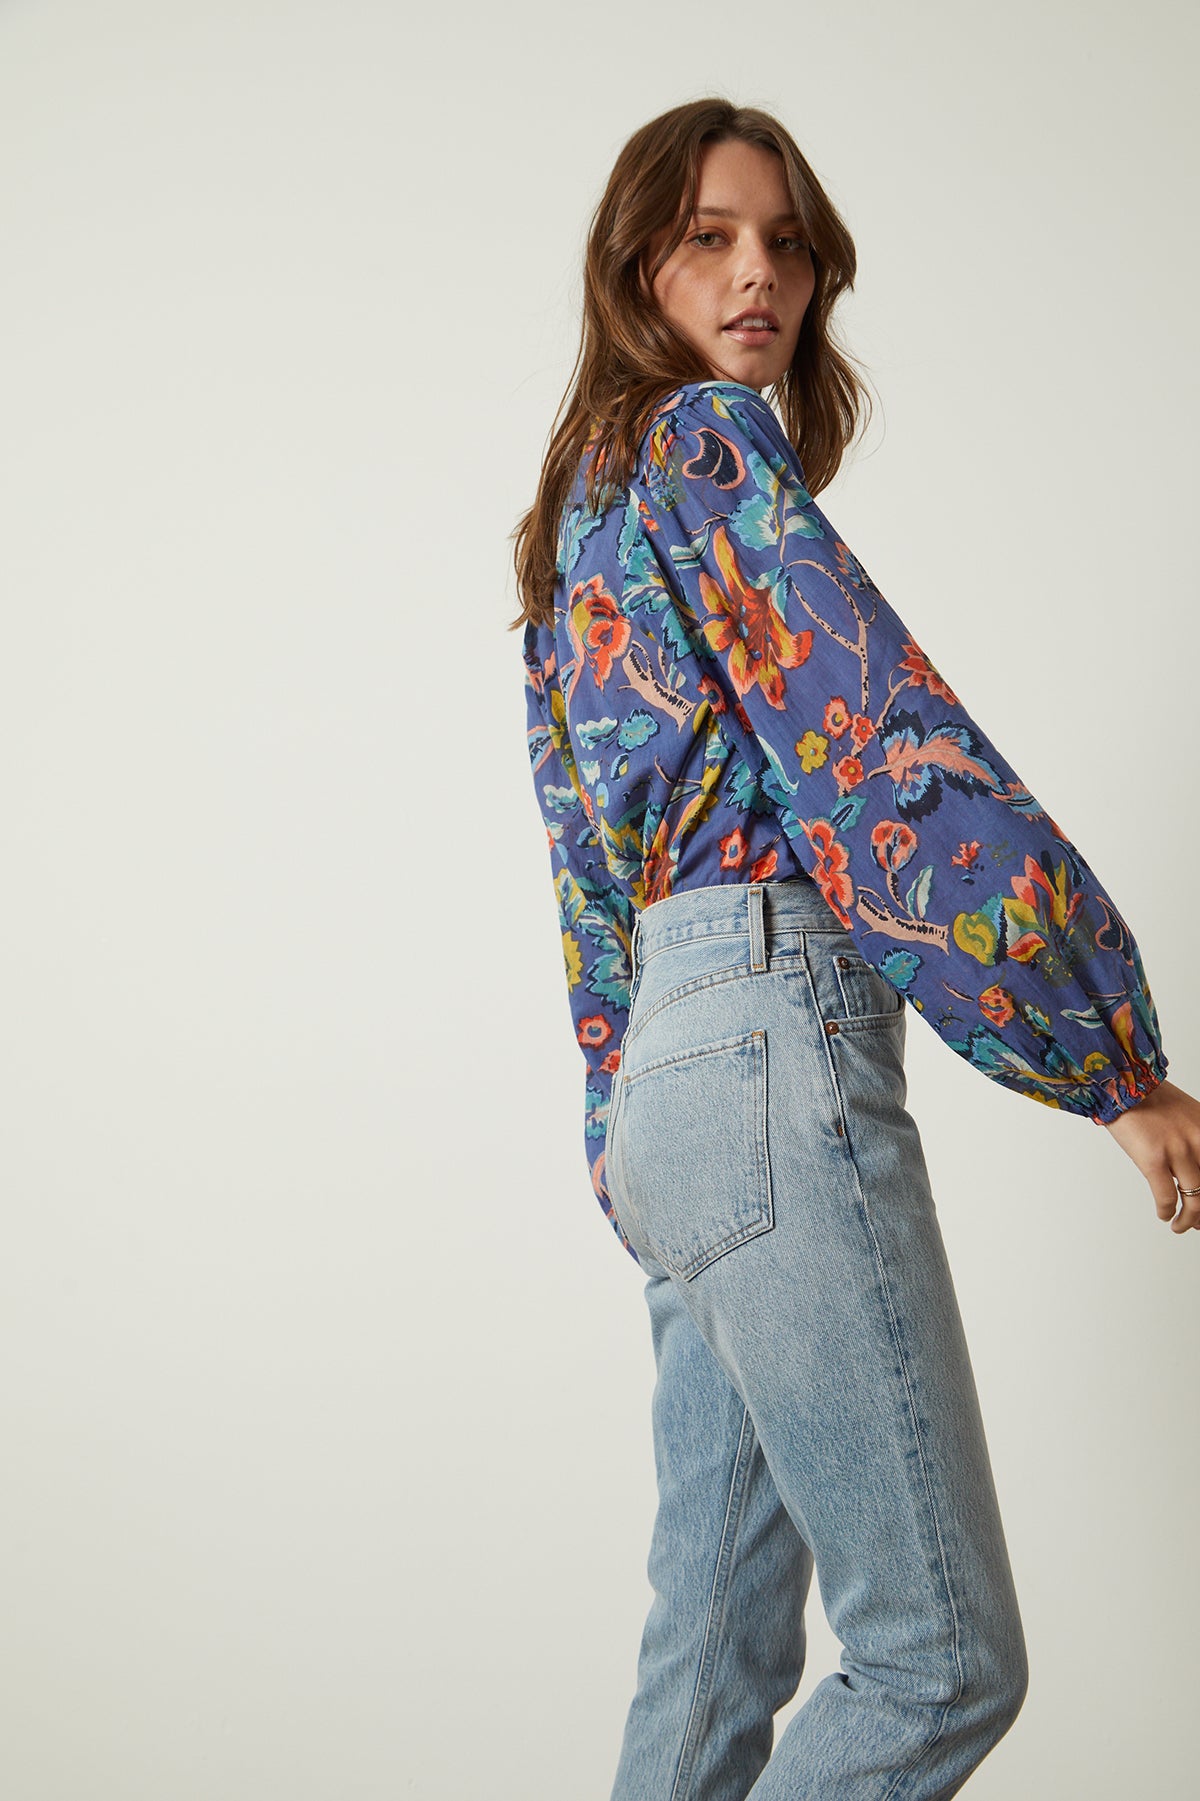   Camryn Top in colorful spring floral print tucked into blue denim side & back accentuating sleeve  